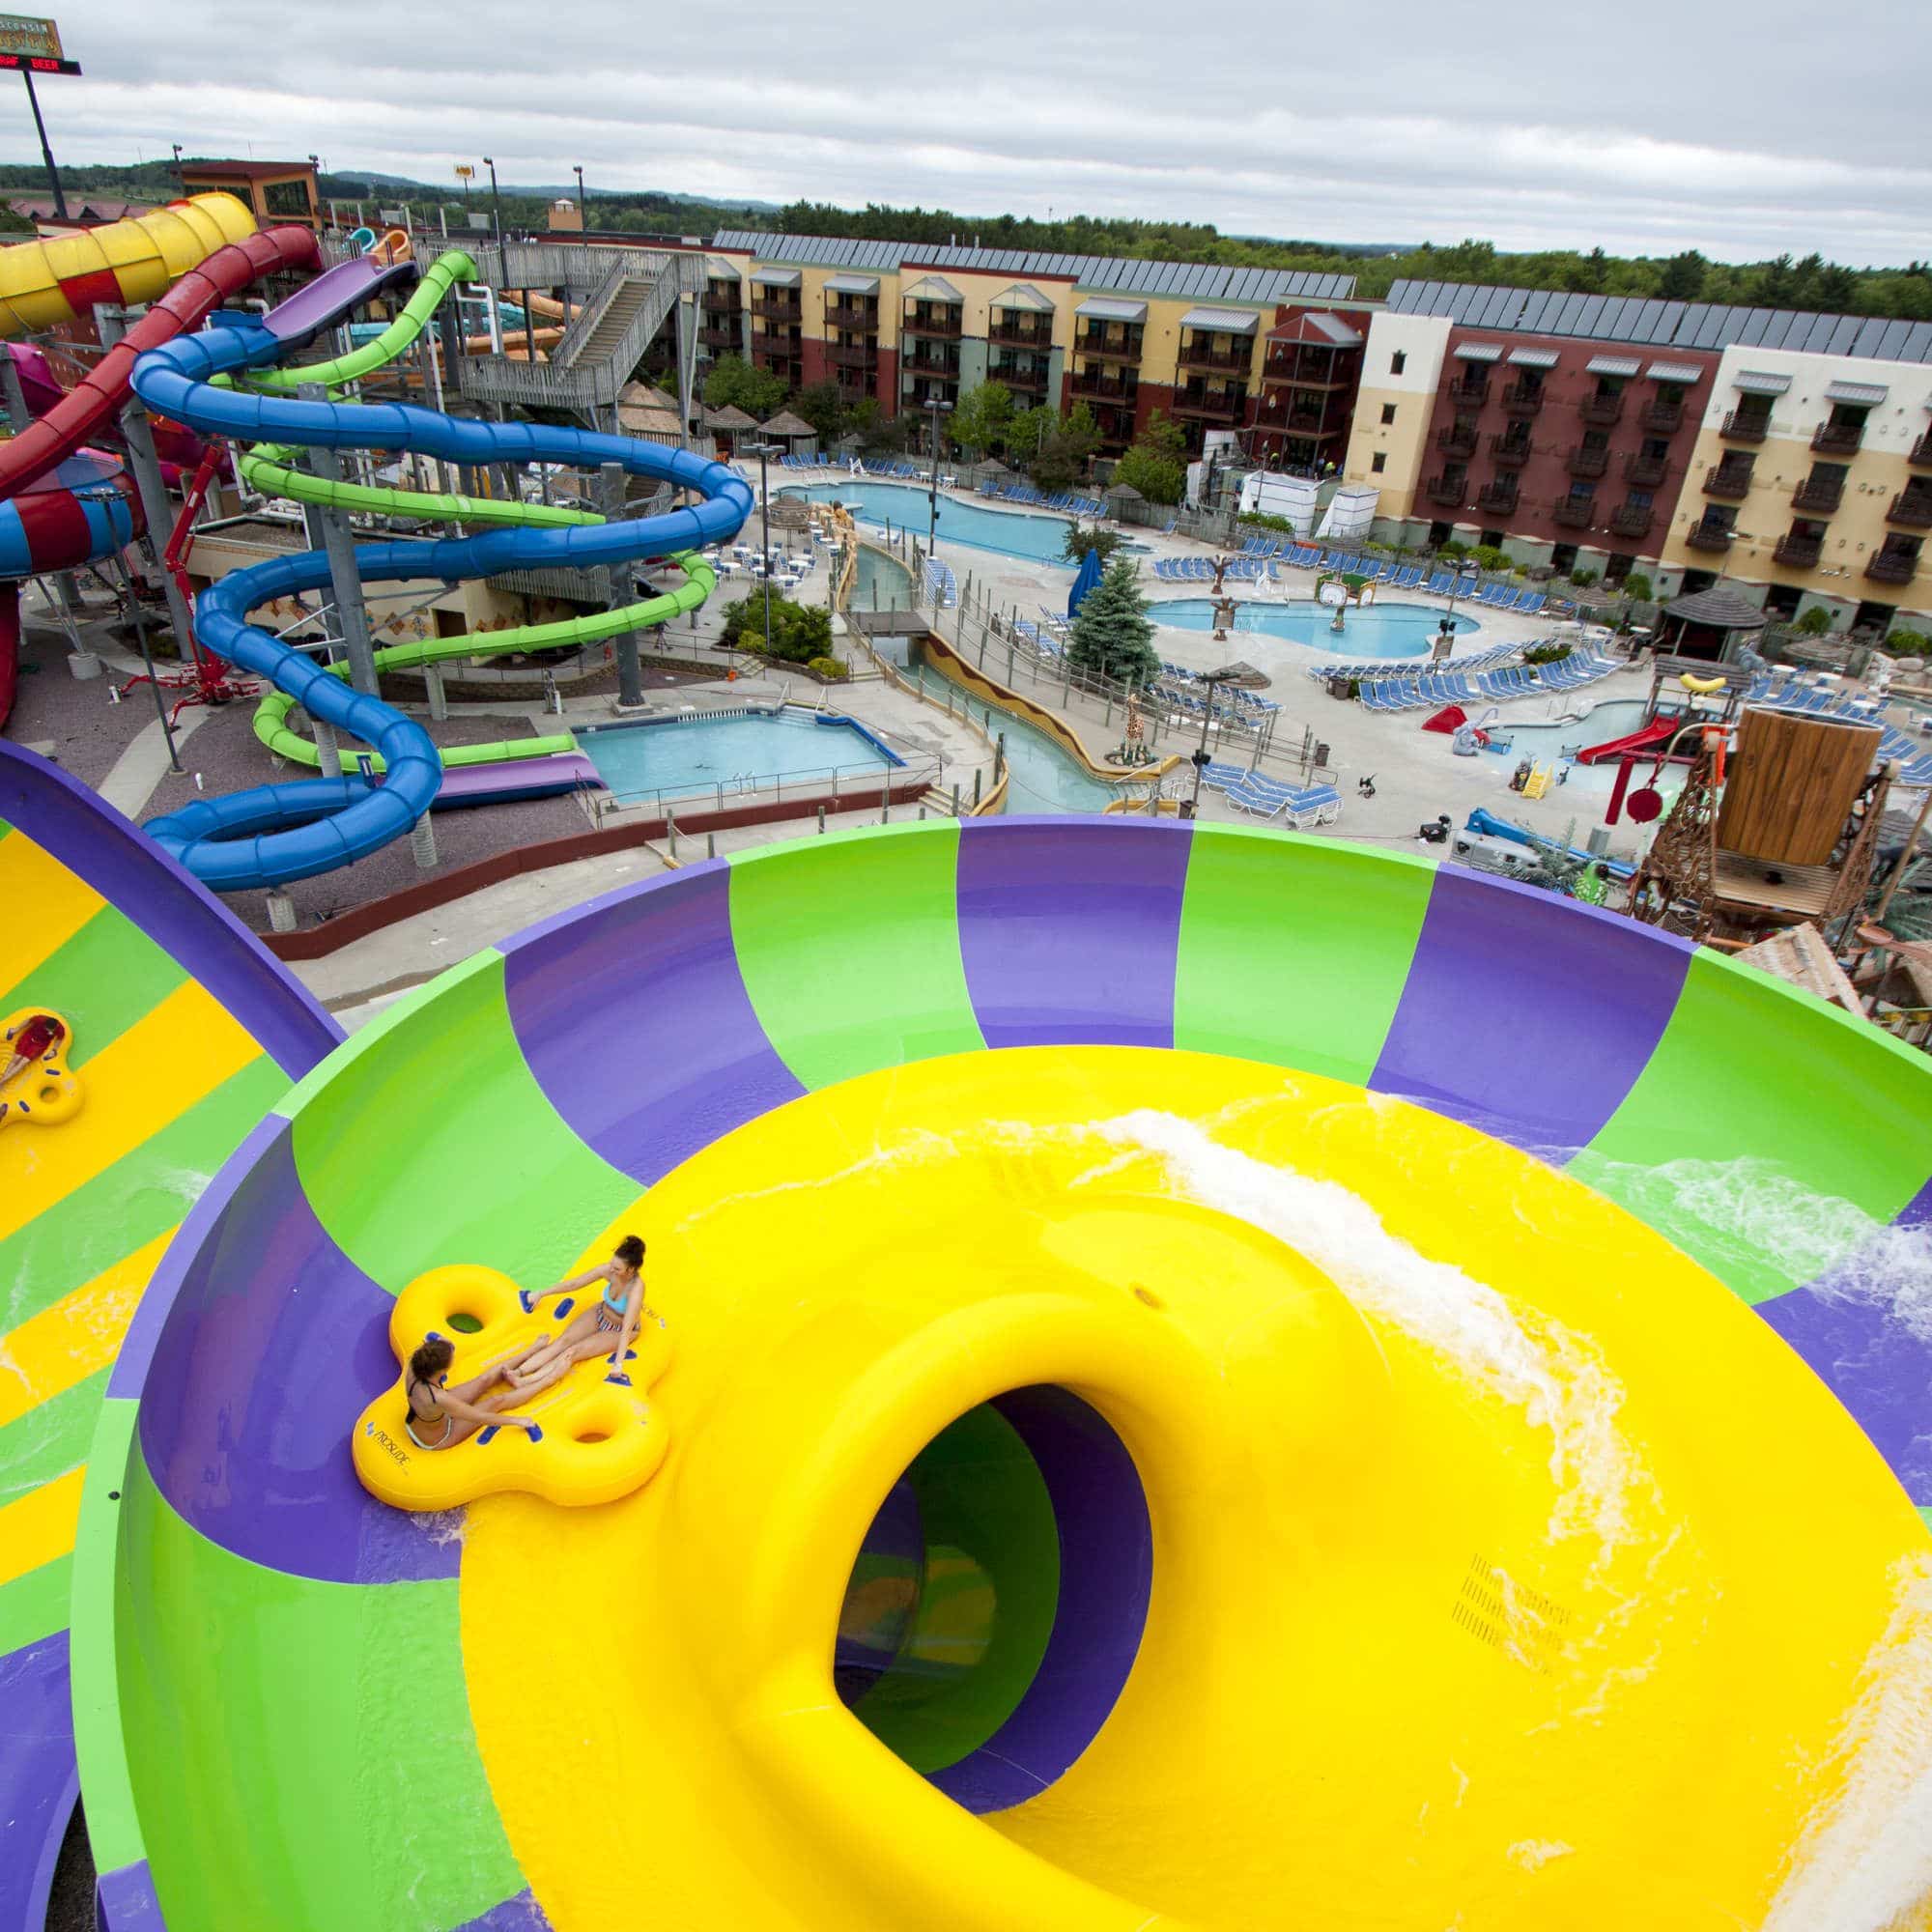 8 Water Parks That Are Actually Fun for Adults